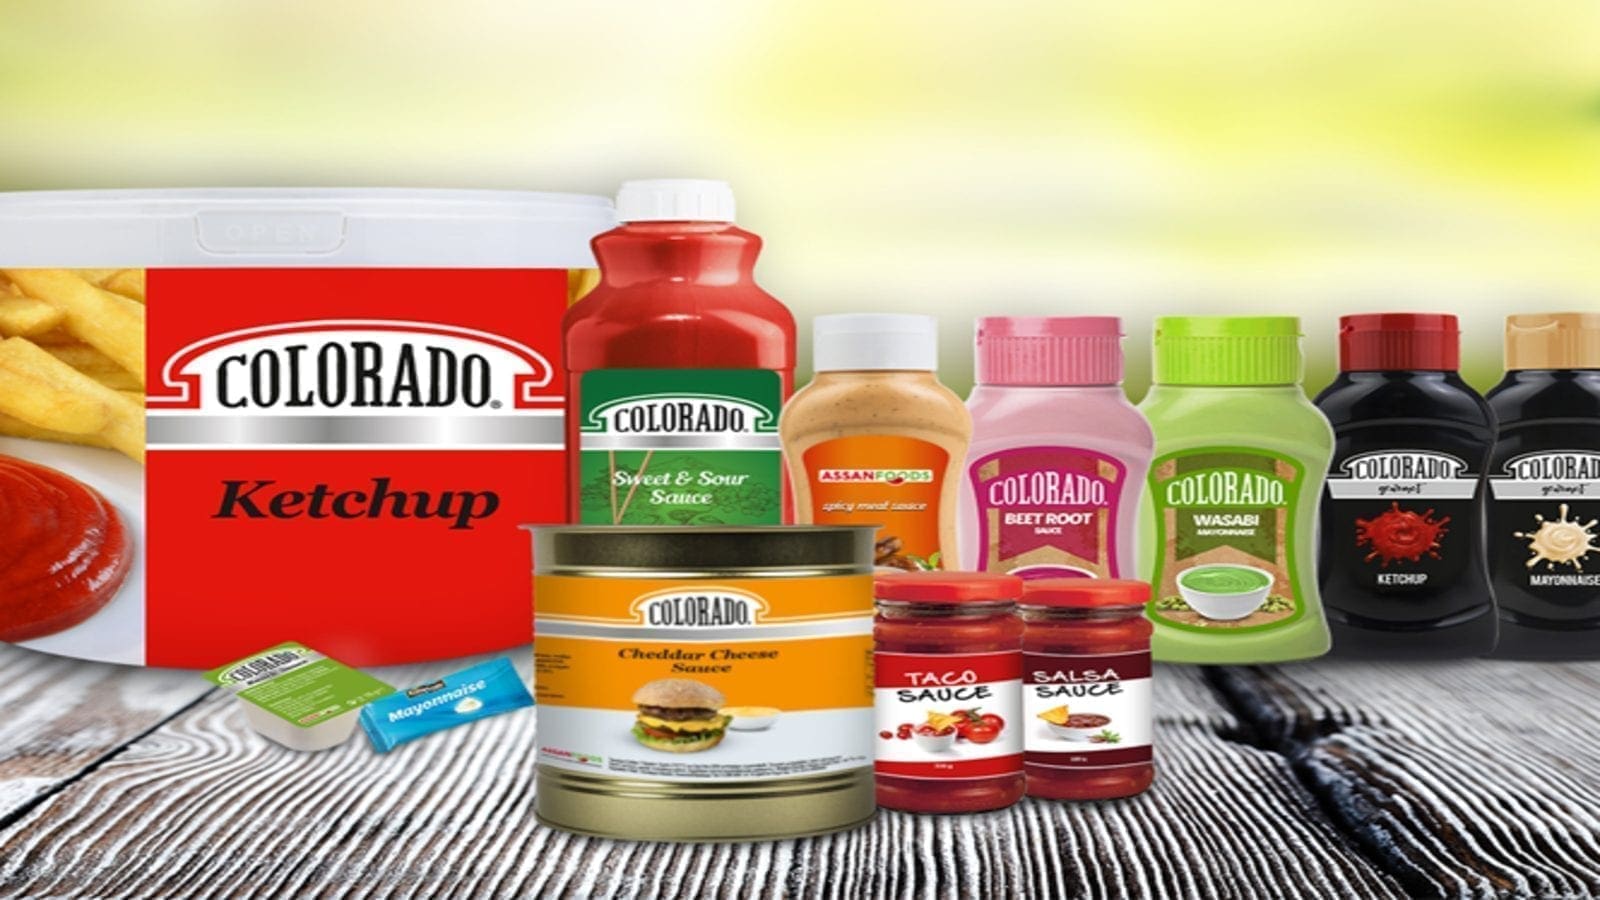 Kraft Heinz to acquire Turkish sauce company Assan Foods to bolster presence in EMEA